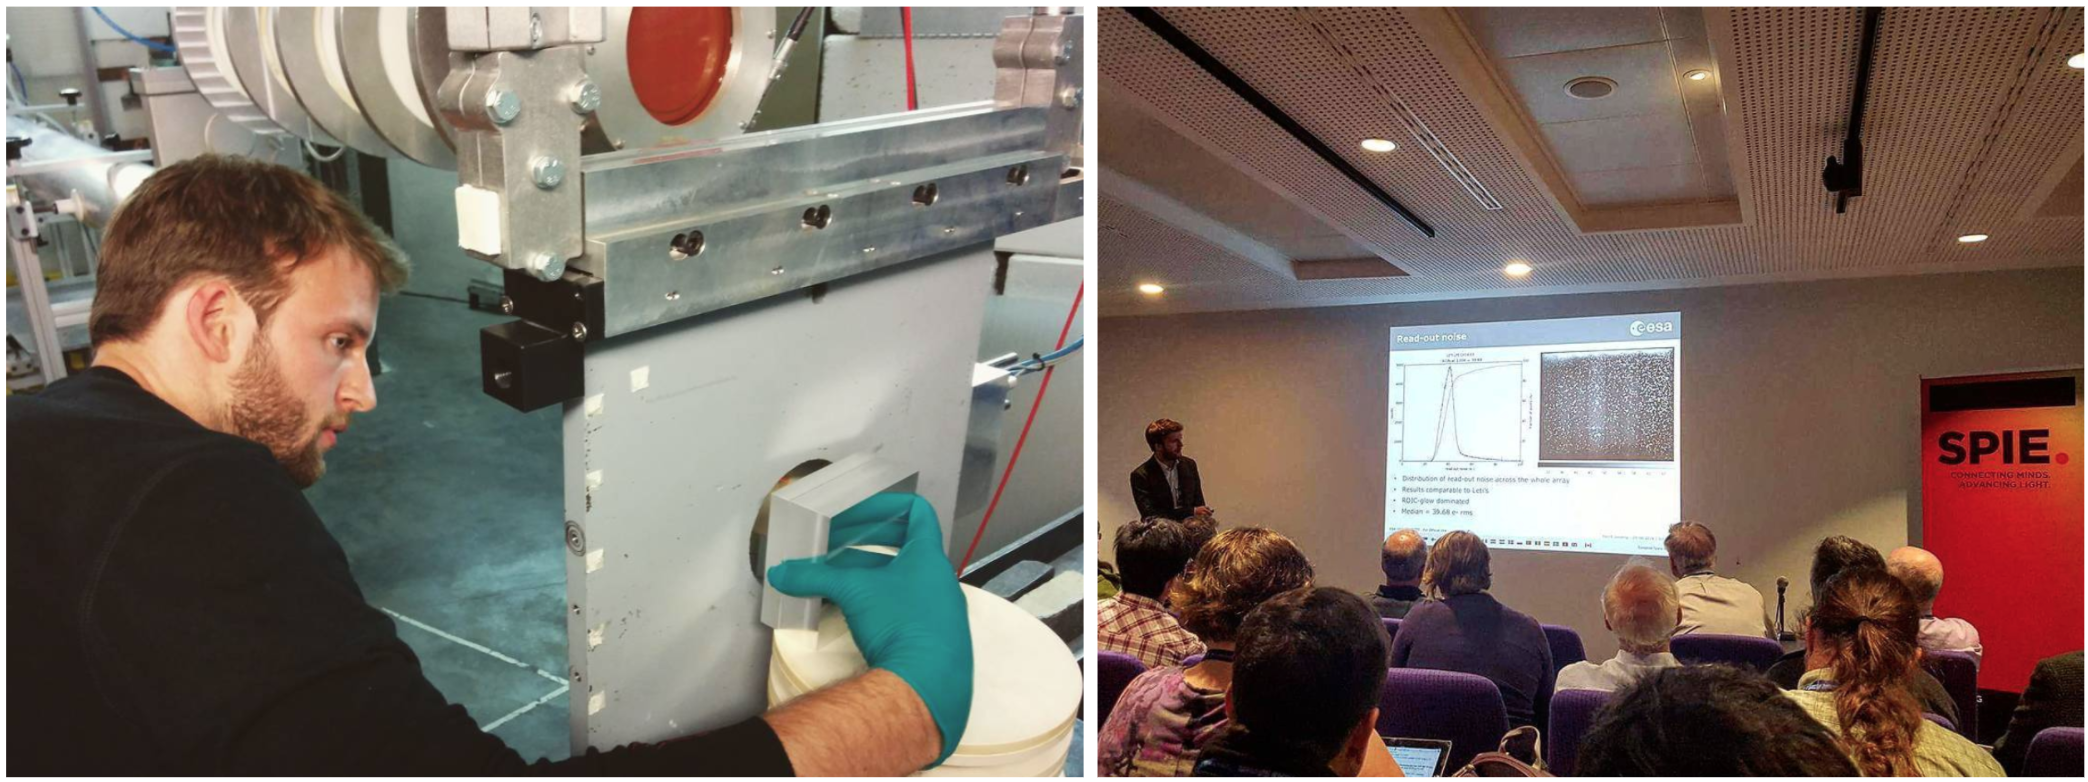 A man testing hardware in the lab on the left, and on the right presenting some results at a conference.